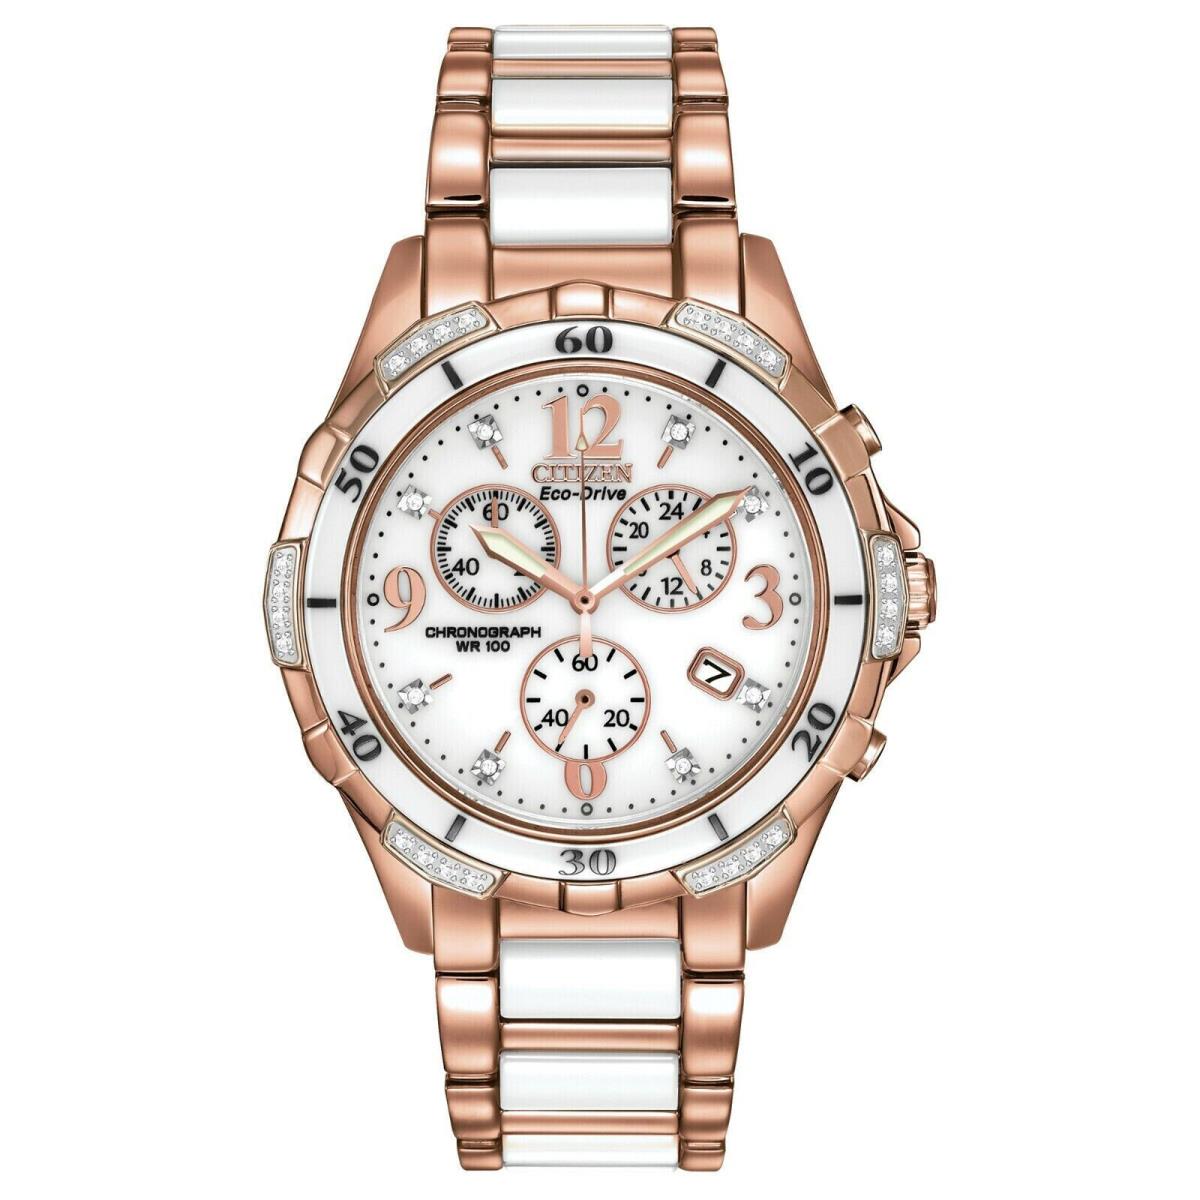 Citizen FB1233-51A Silhouette Diamond Chronograph White Ceramic Band Watch - Dial: White, Band: Rose Gold, Bezel: Rose Gold